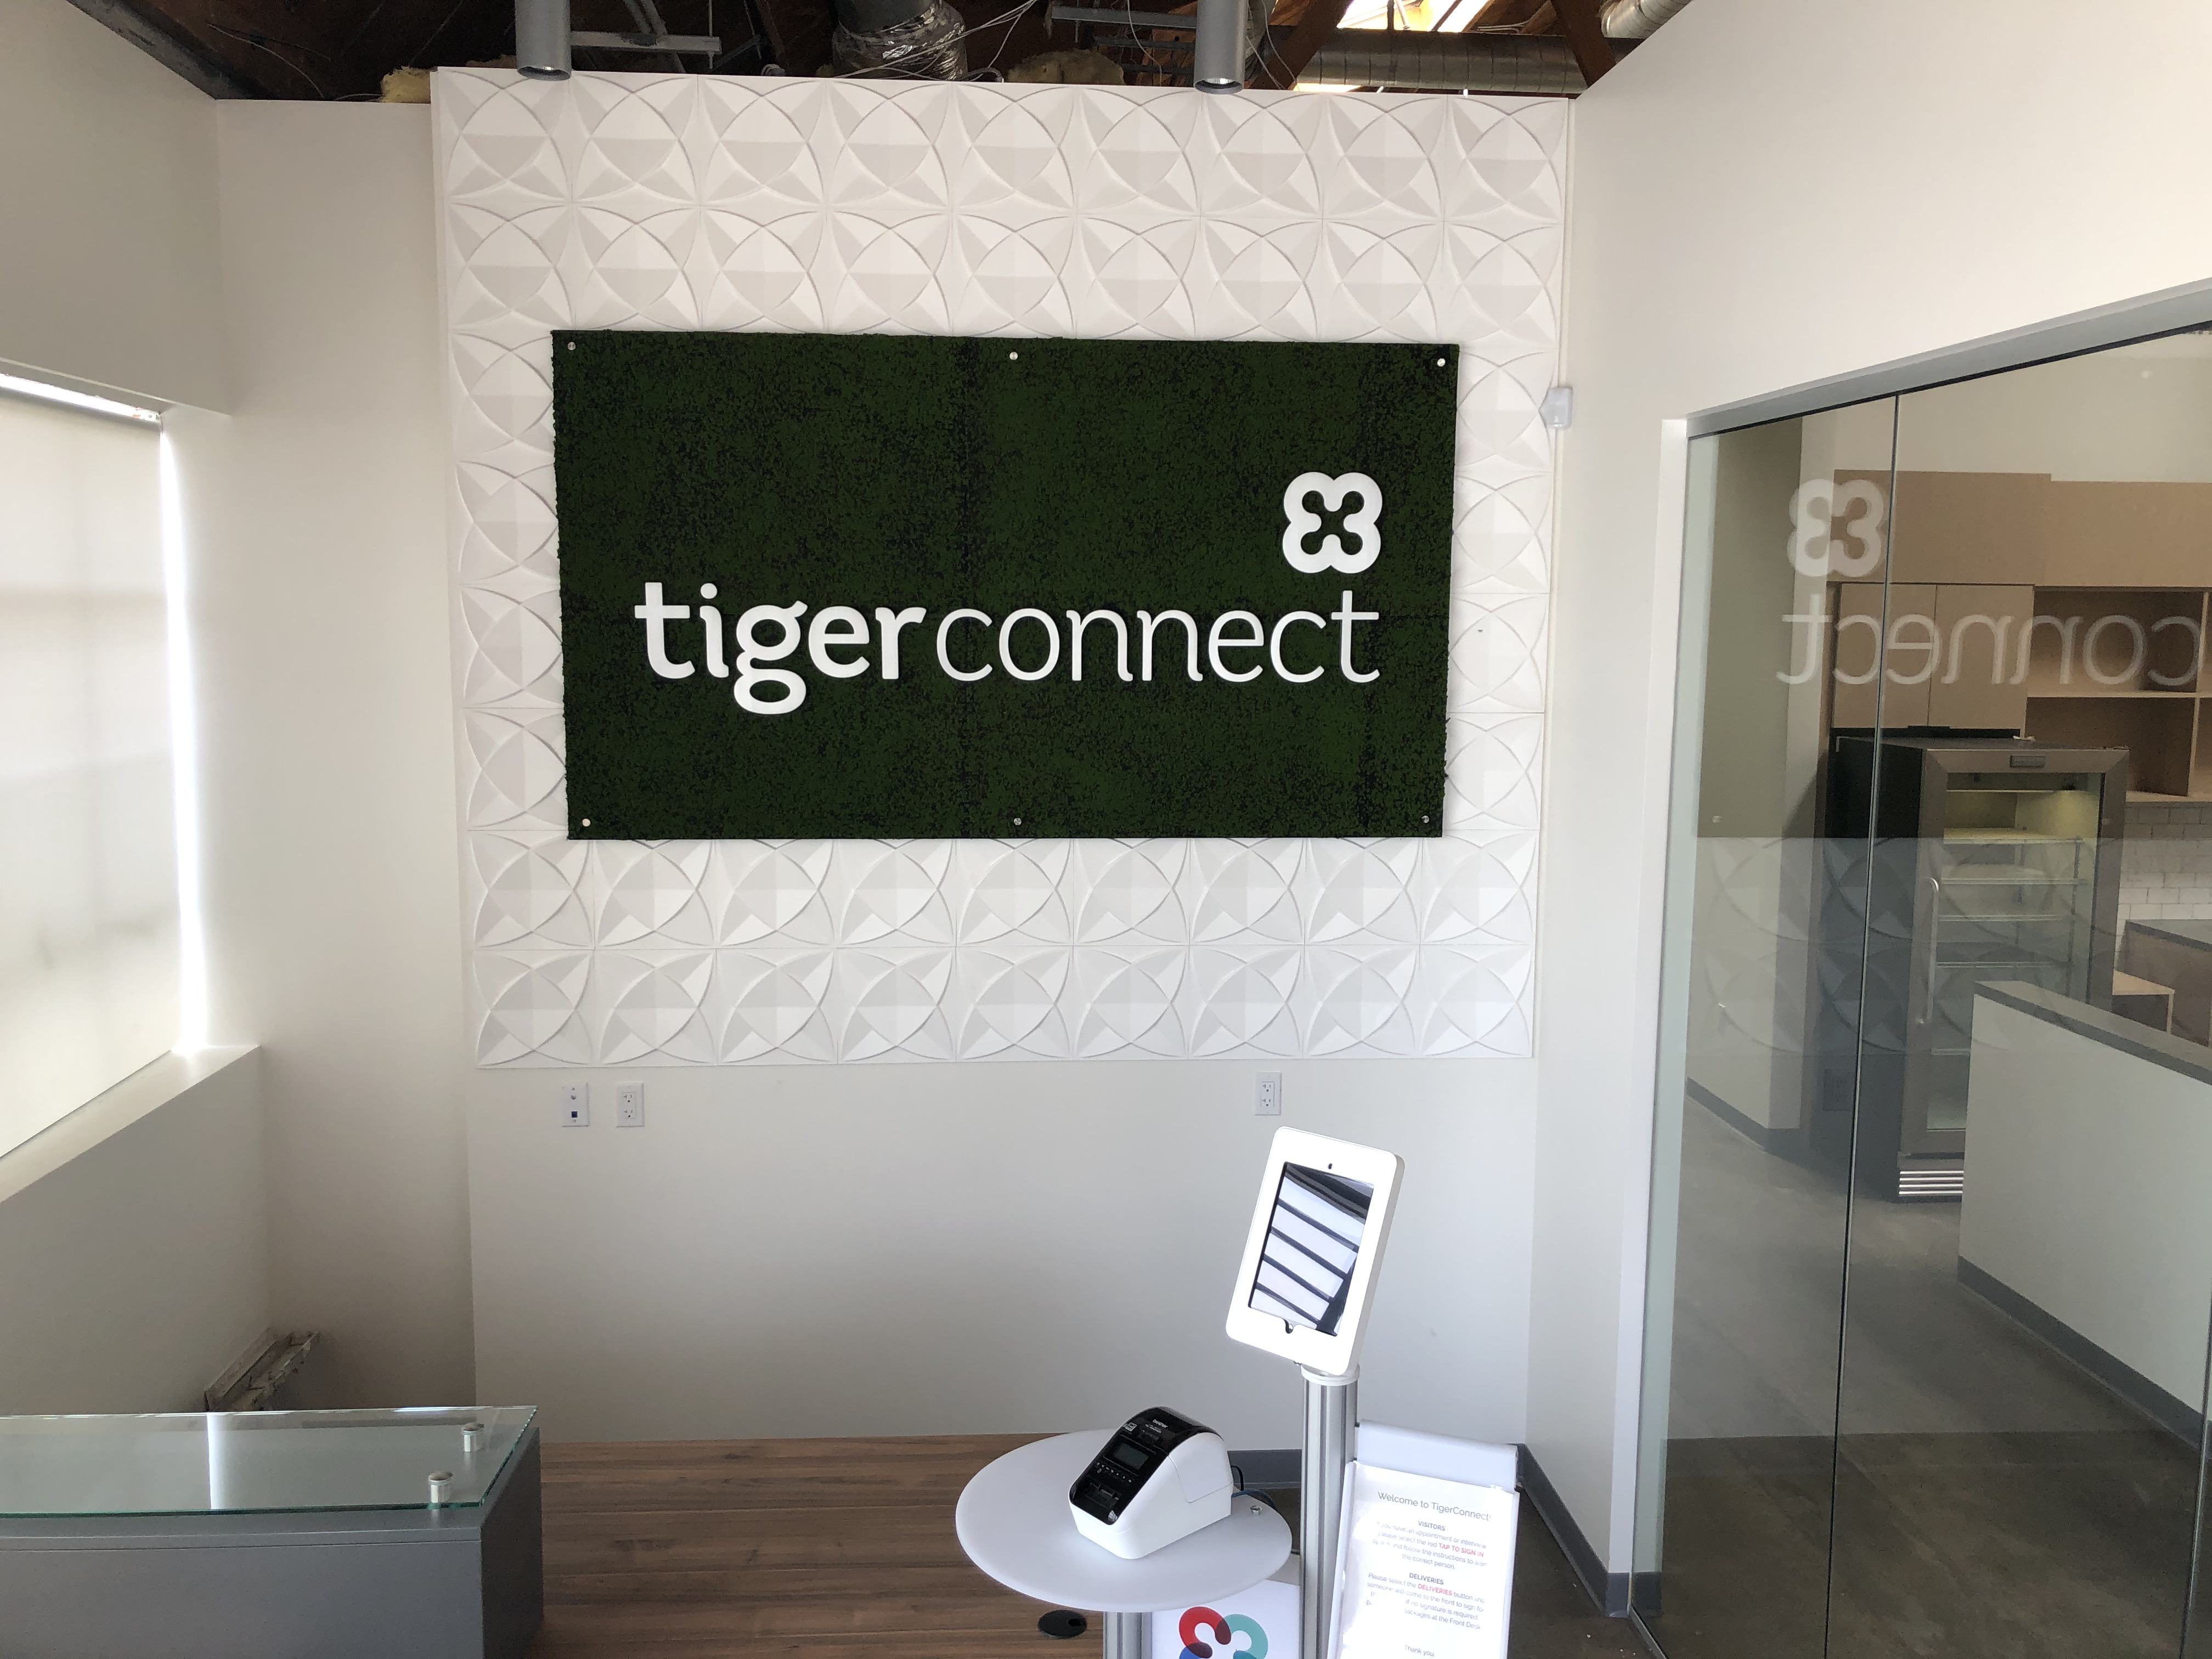 This lobby sign project included prismatic background wallpaper. So now Tiger Connect's Santa Monica office looks complete!